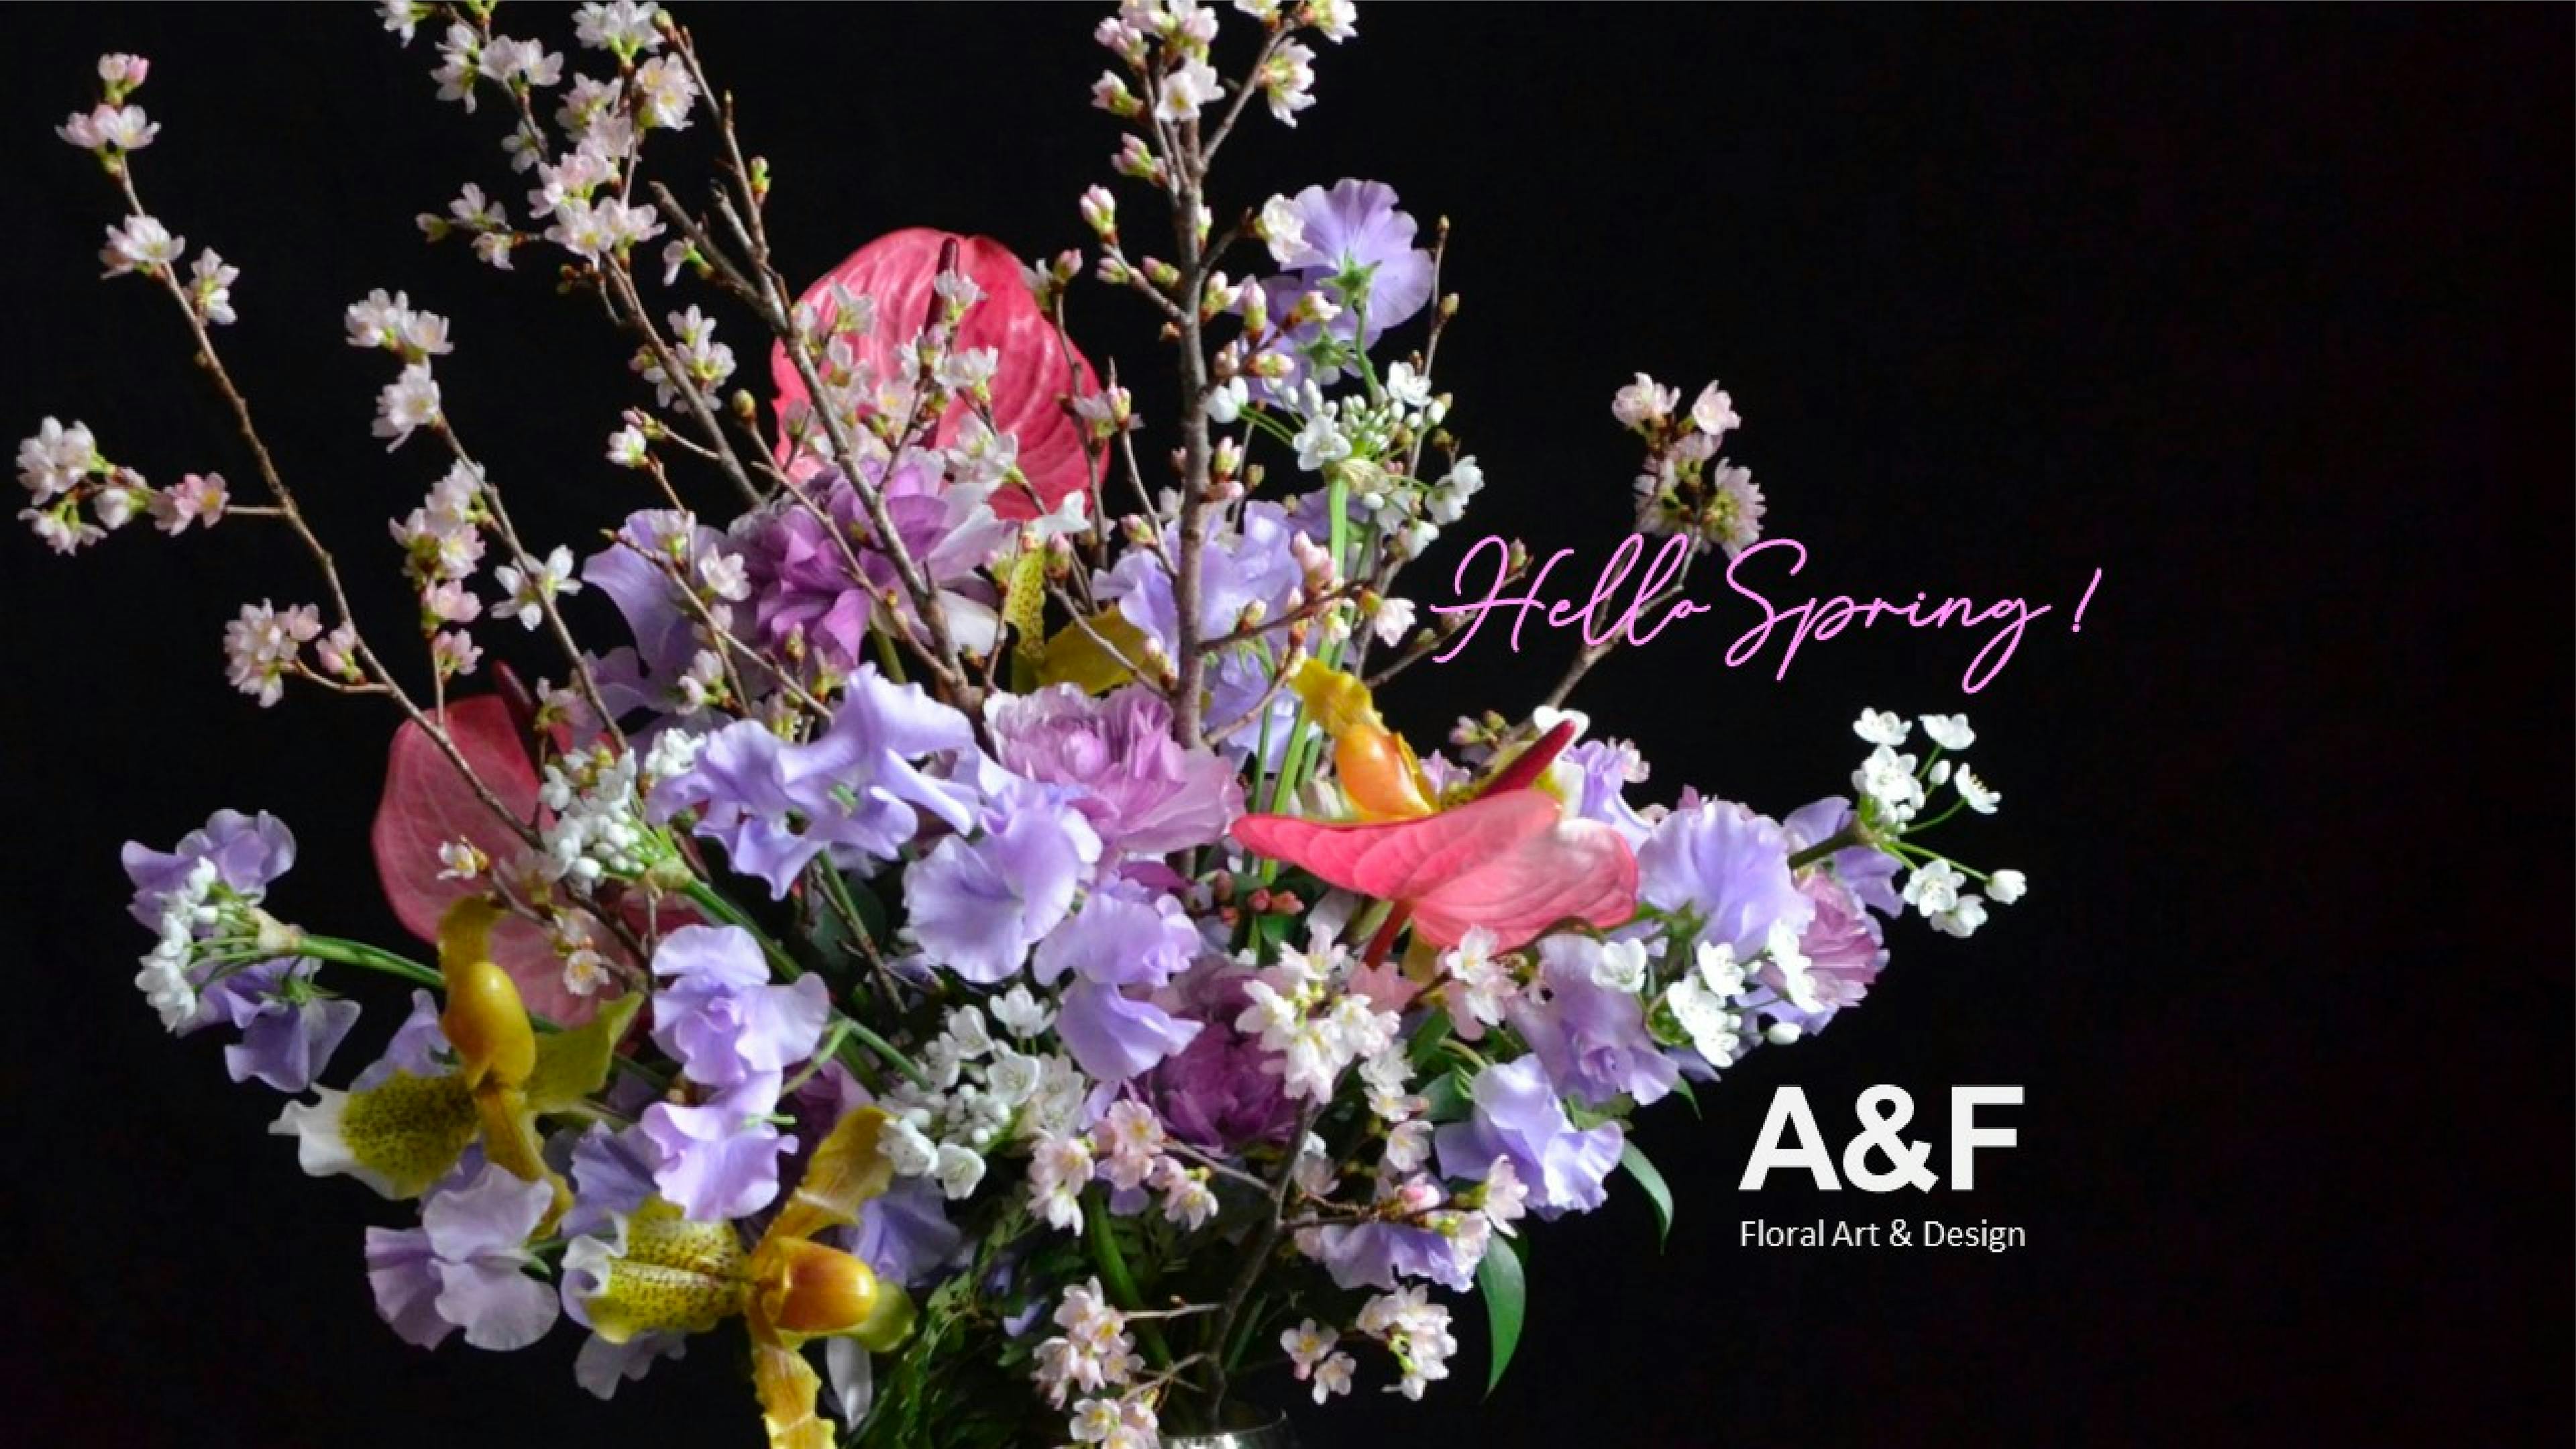 A&F Floral Art and Design